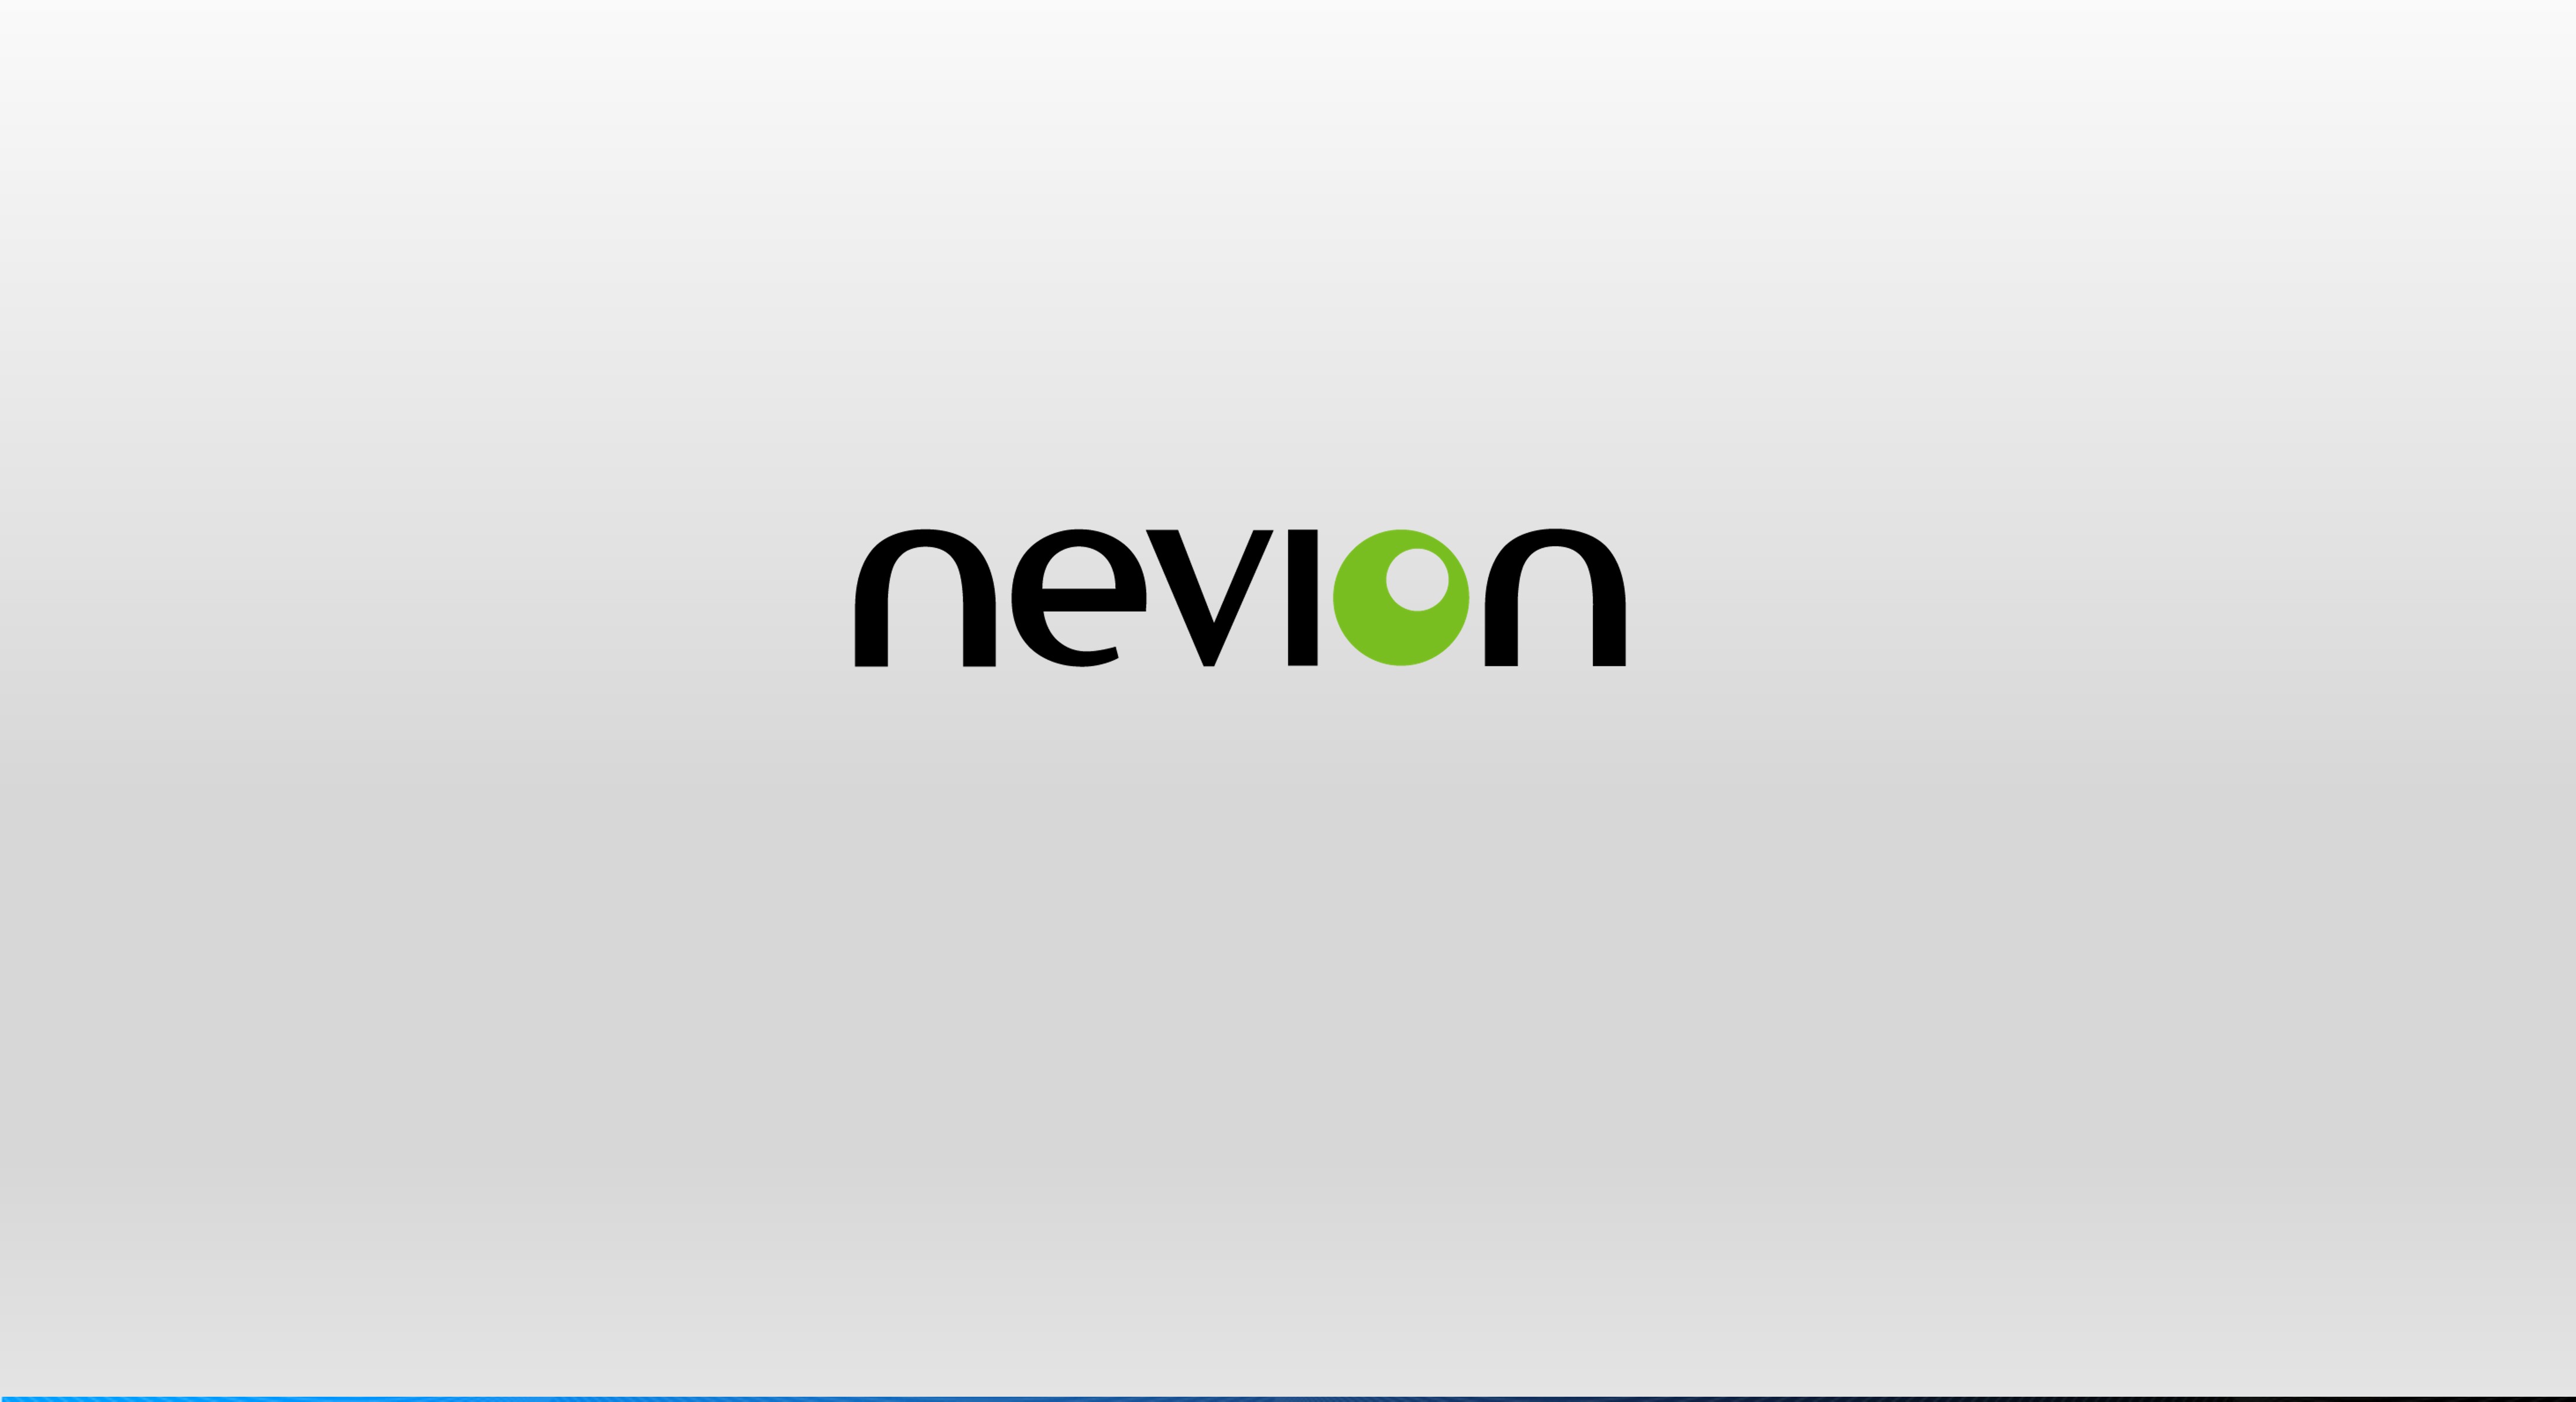 Amagi and Nevion Partner to Simplify Premium Pop-Up Channel Creation